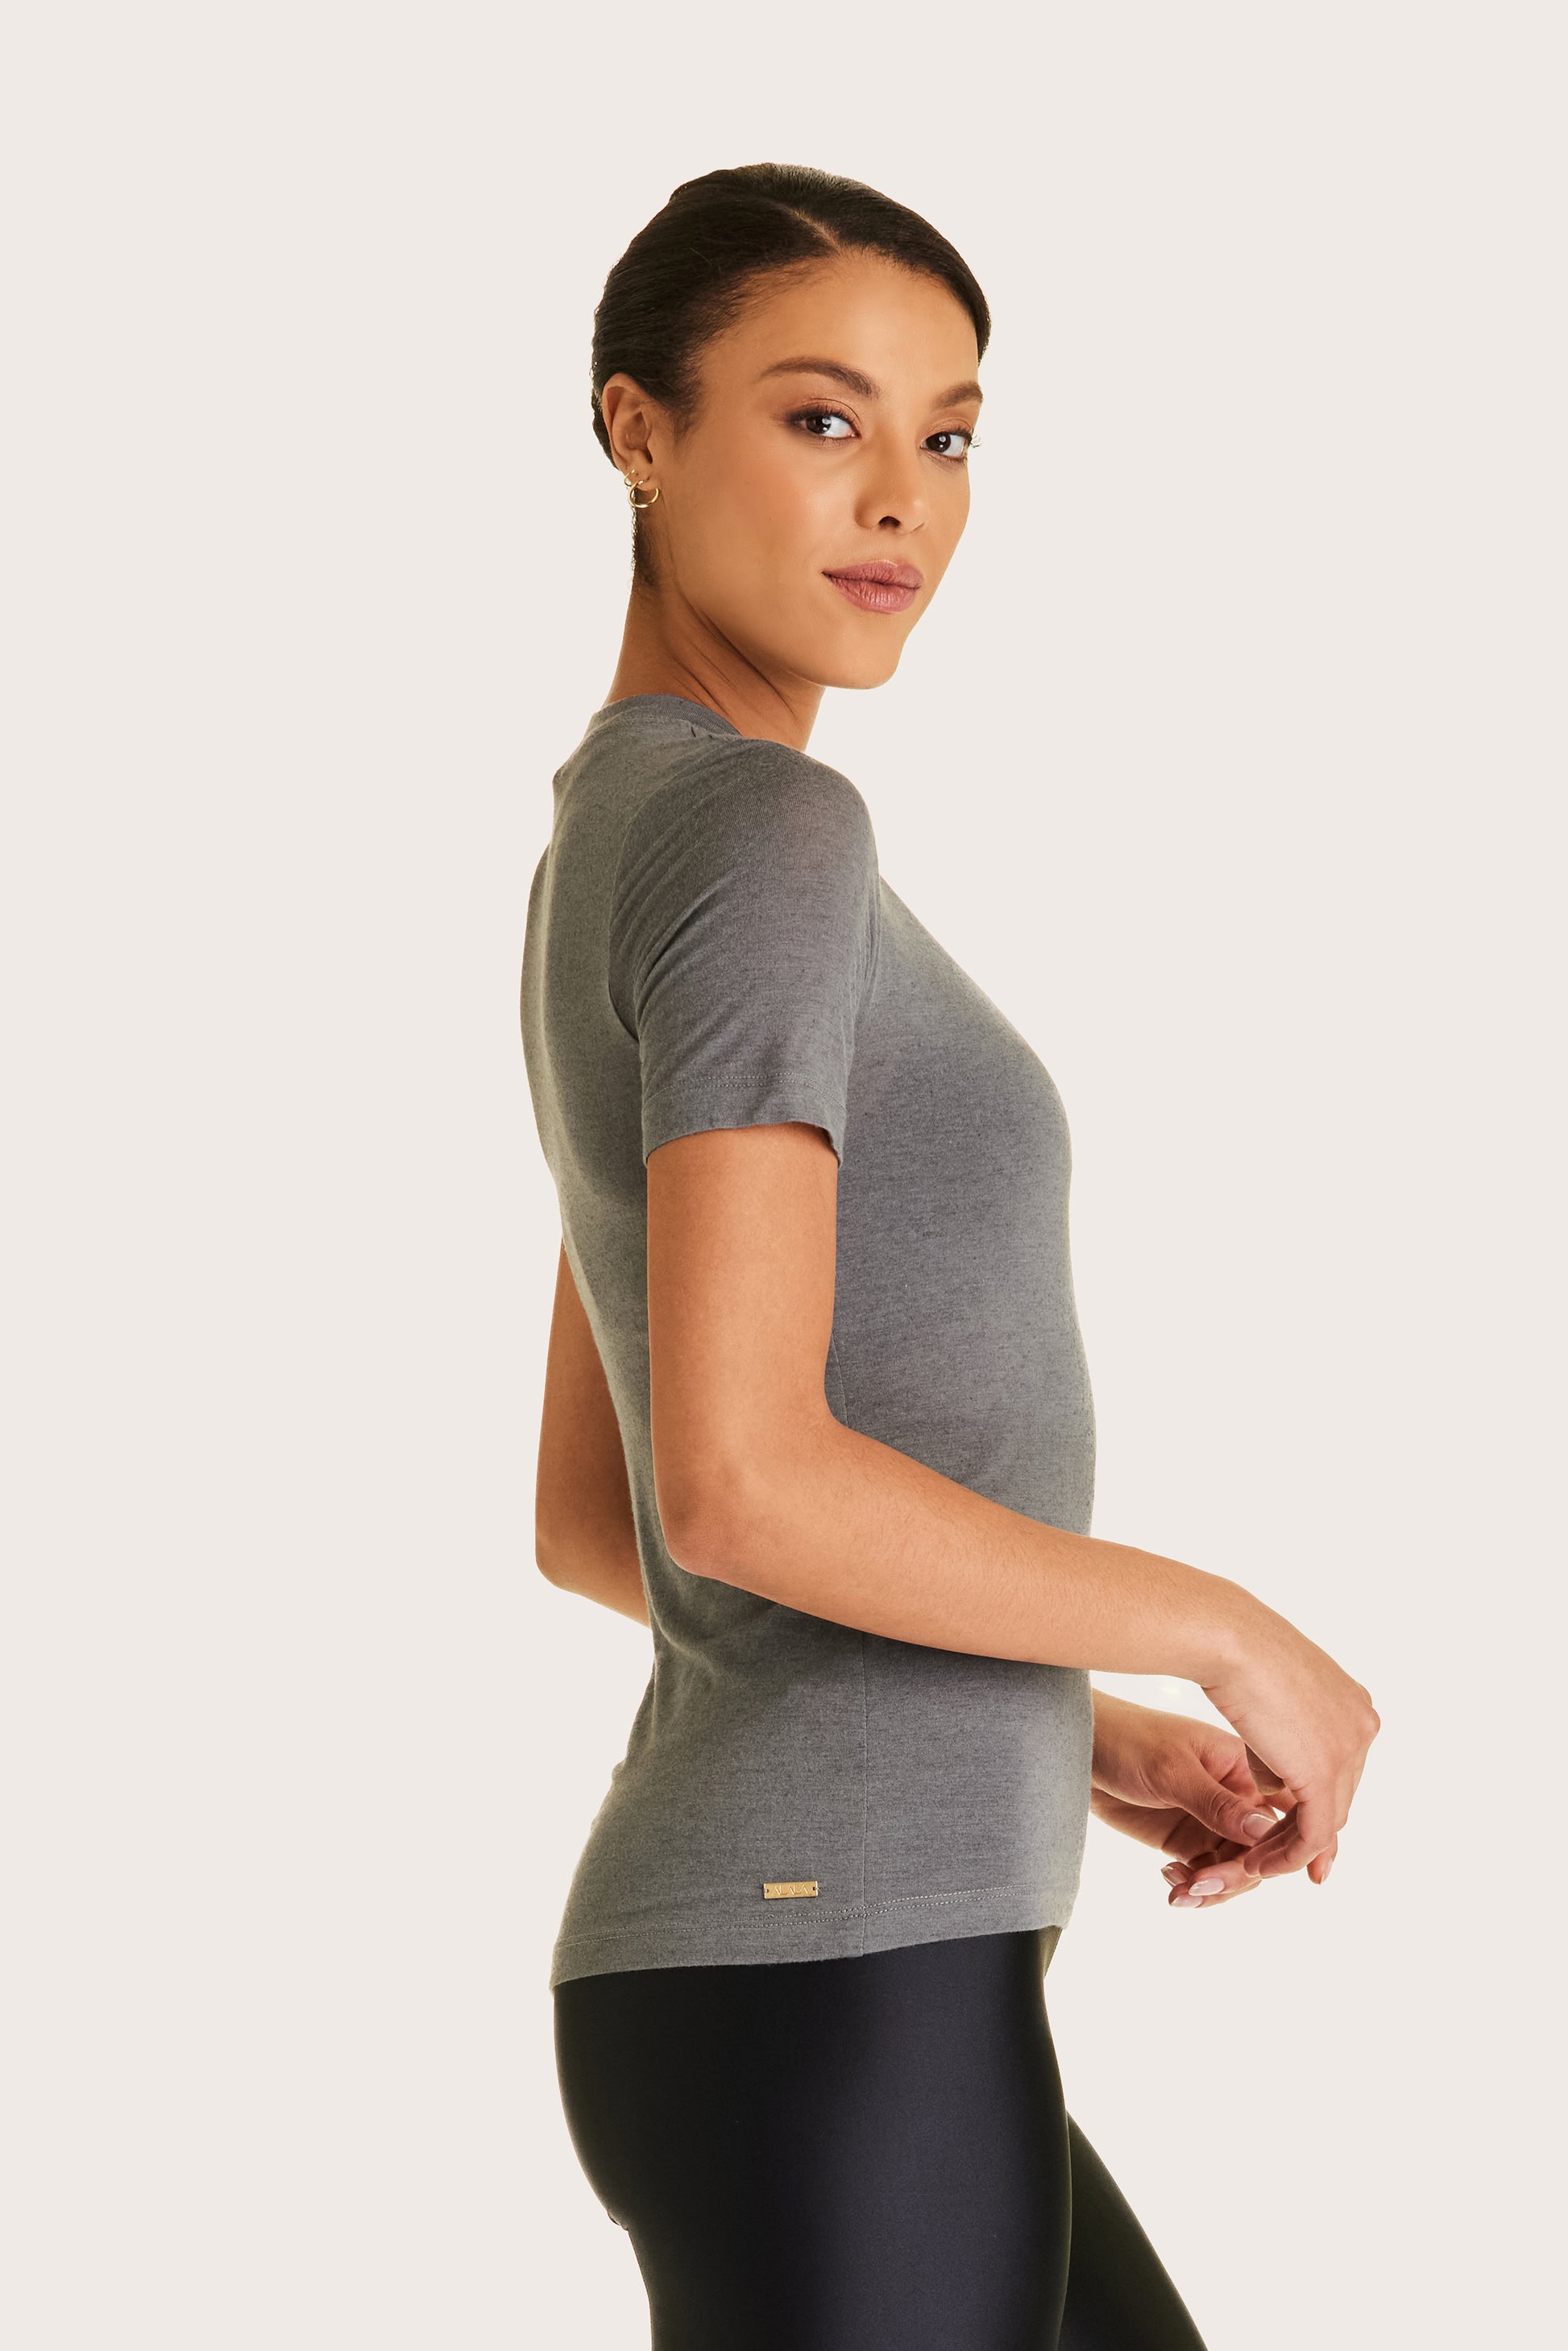 Alala women's Washable Cashmere Tee in grey